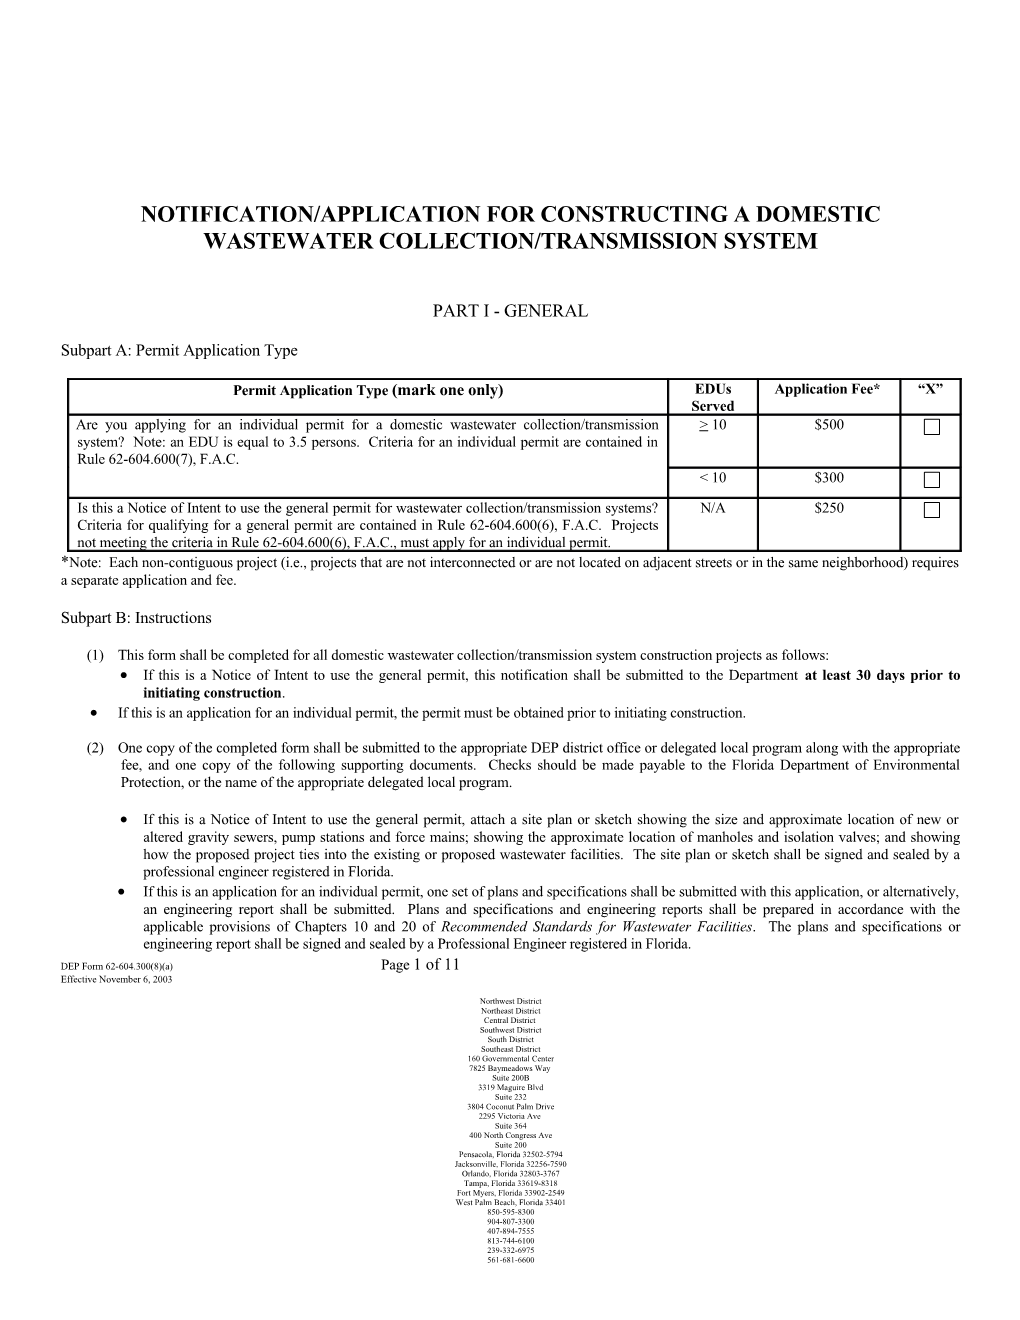 Application to Construct Domestic Wastewater Collection/Transmission Systems